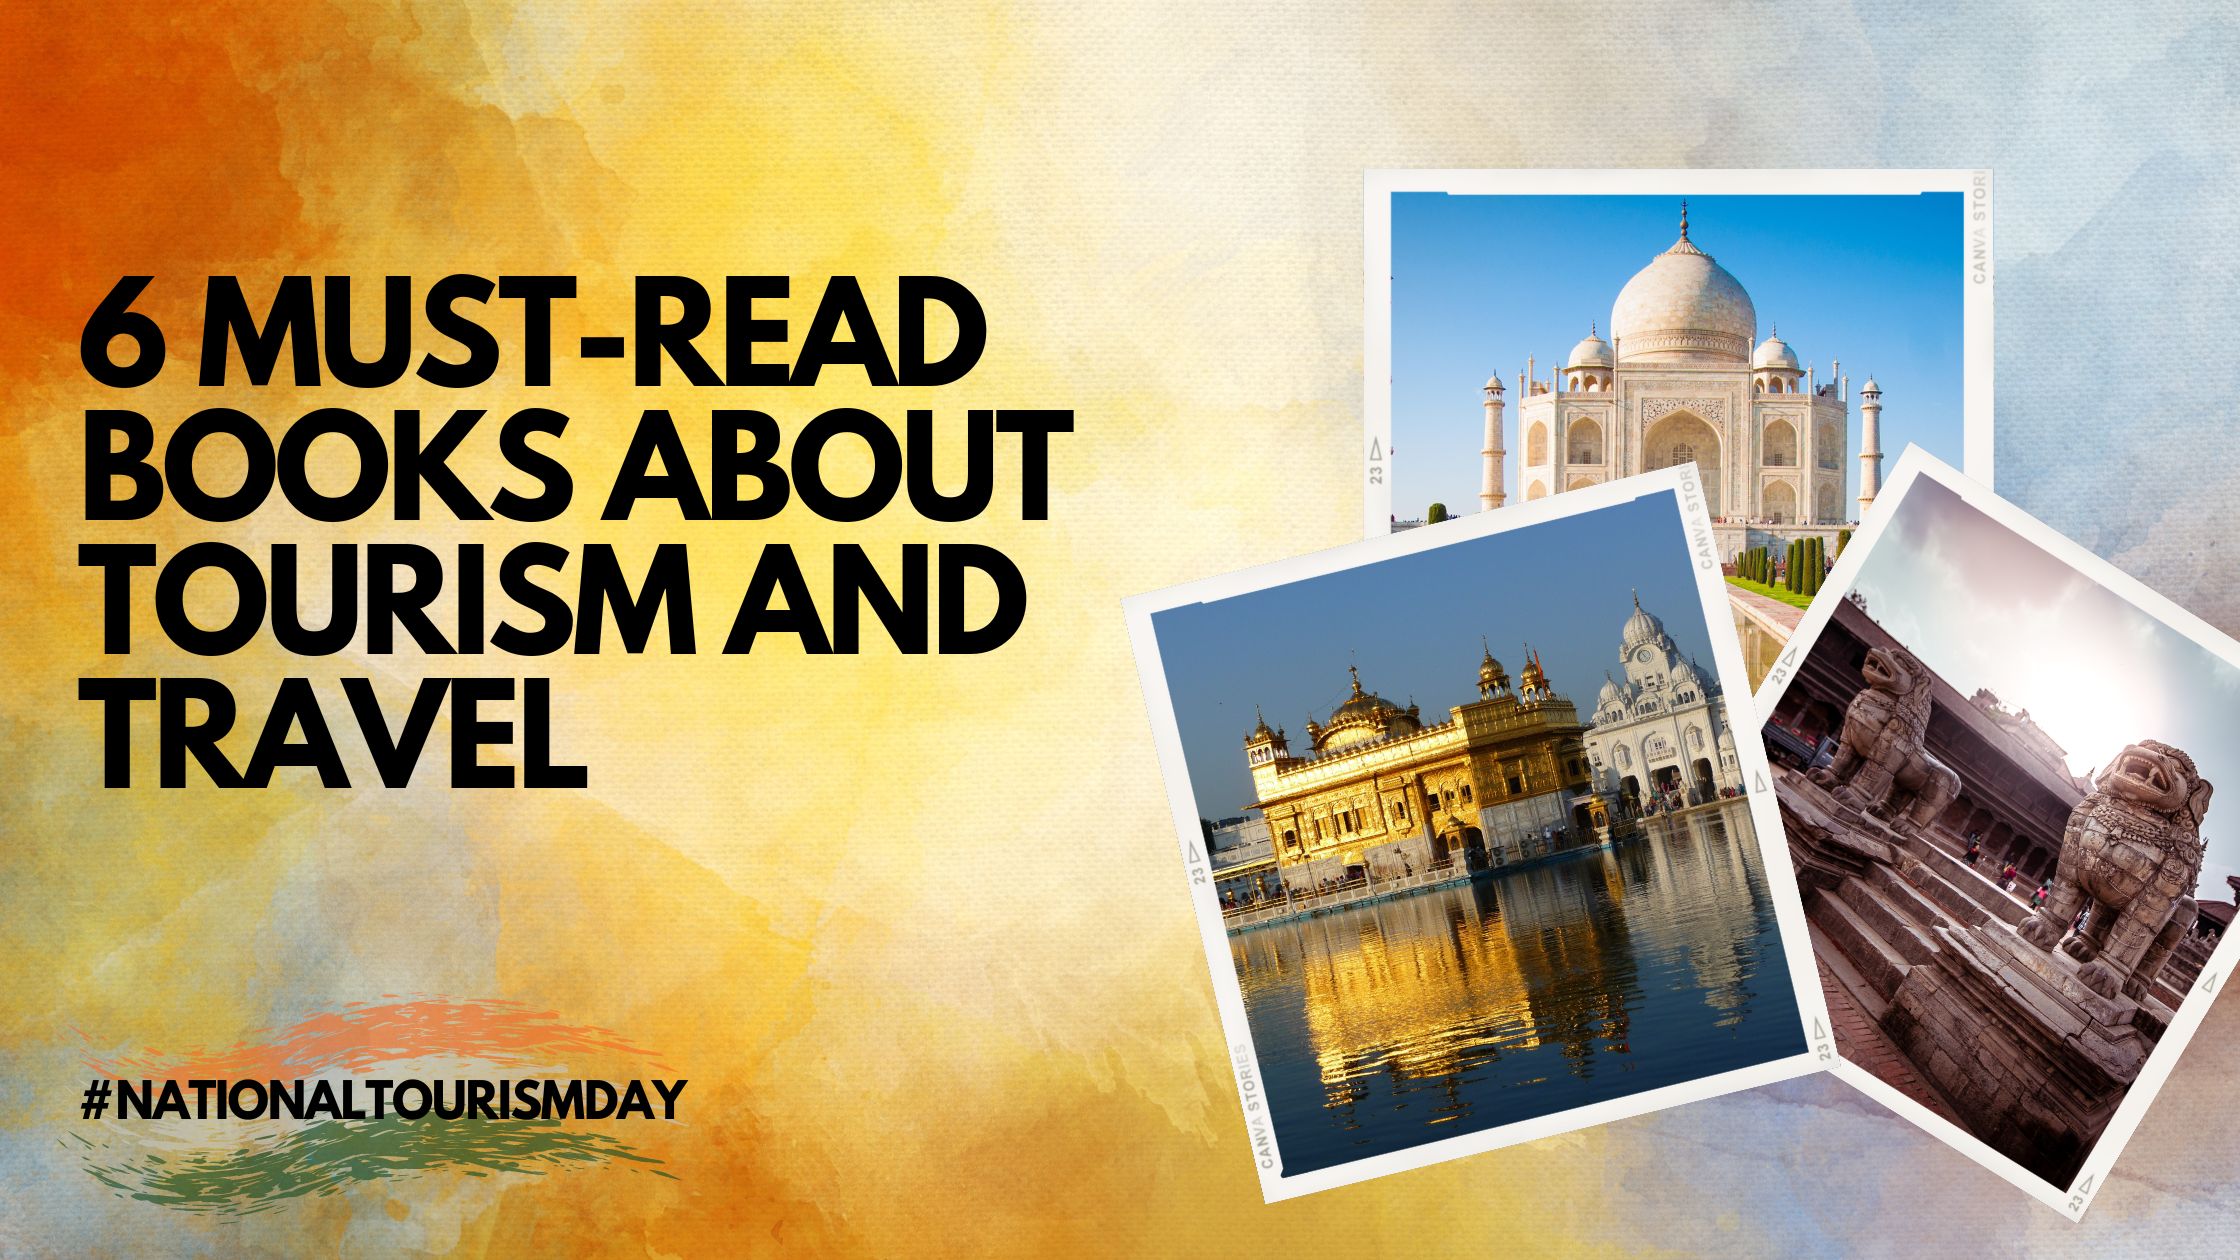 6 must-read books about tourism and travel